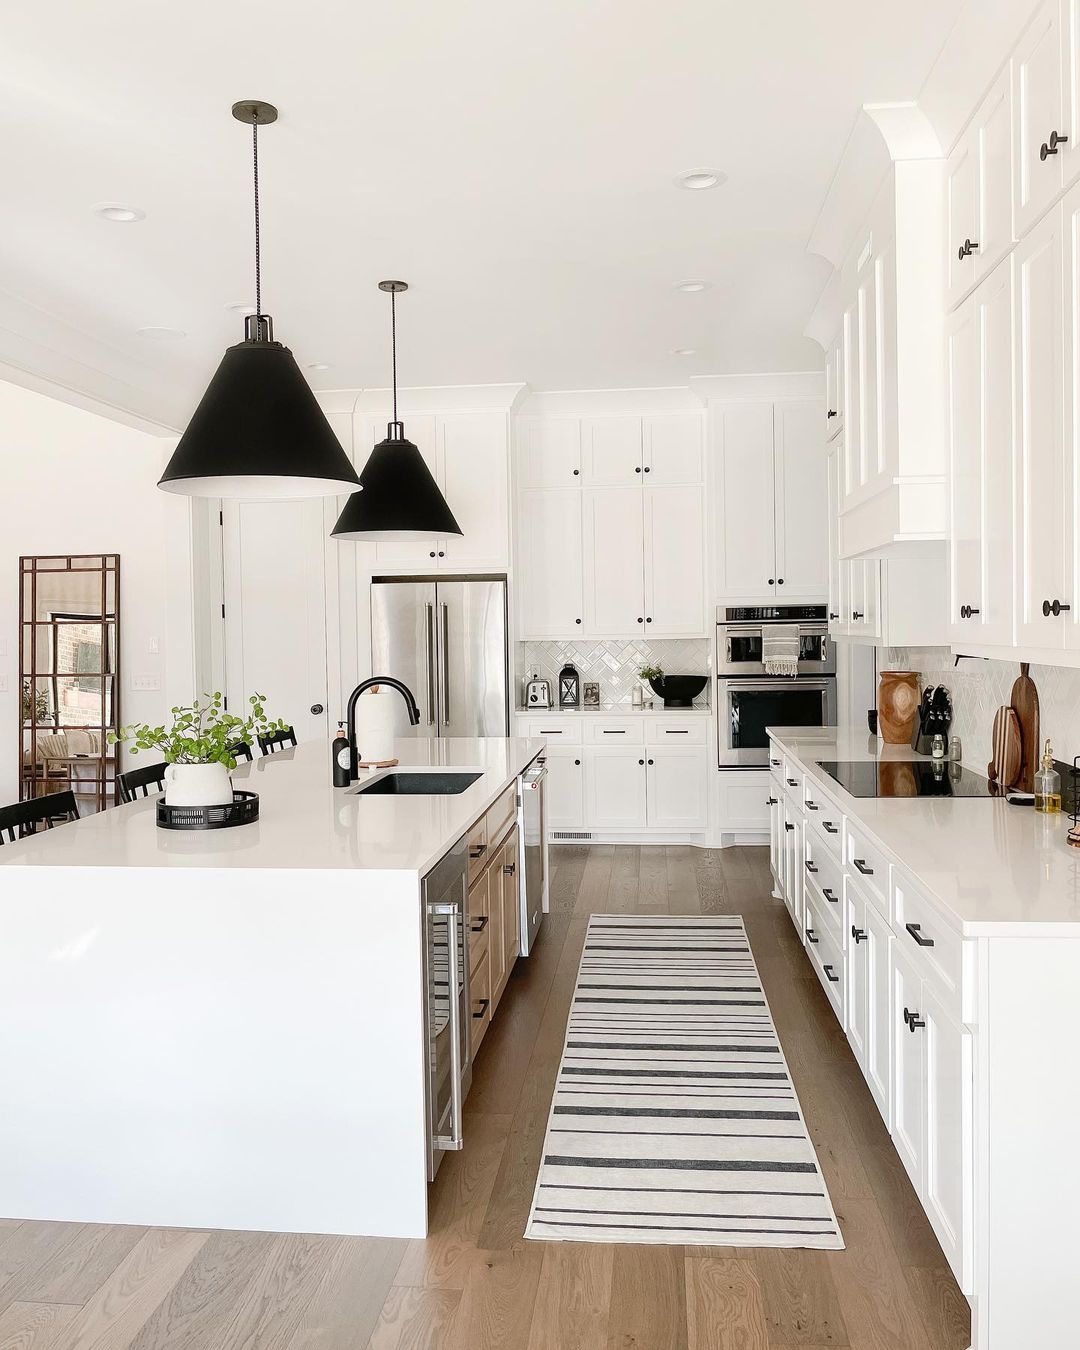 White Farmhouse Kitchen with Black Industrial Pulls. Photo by Instagram user @practical.designs